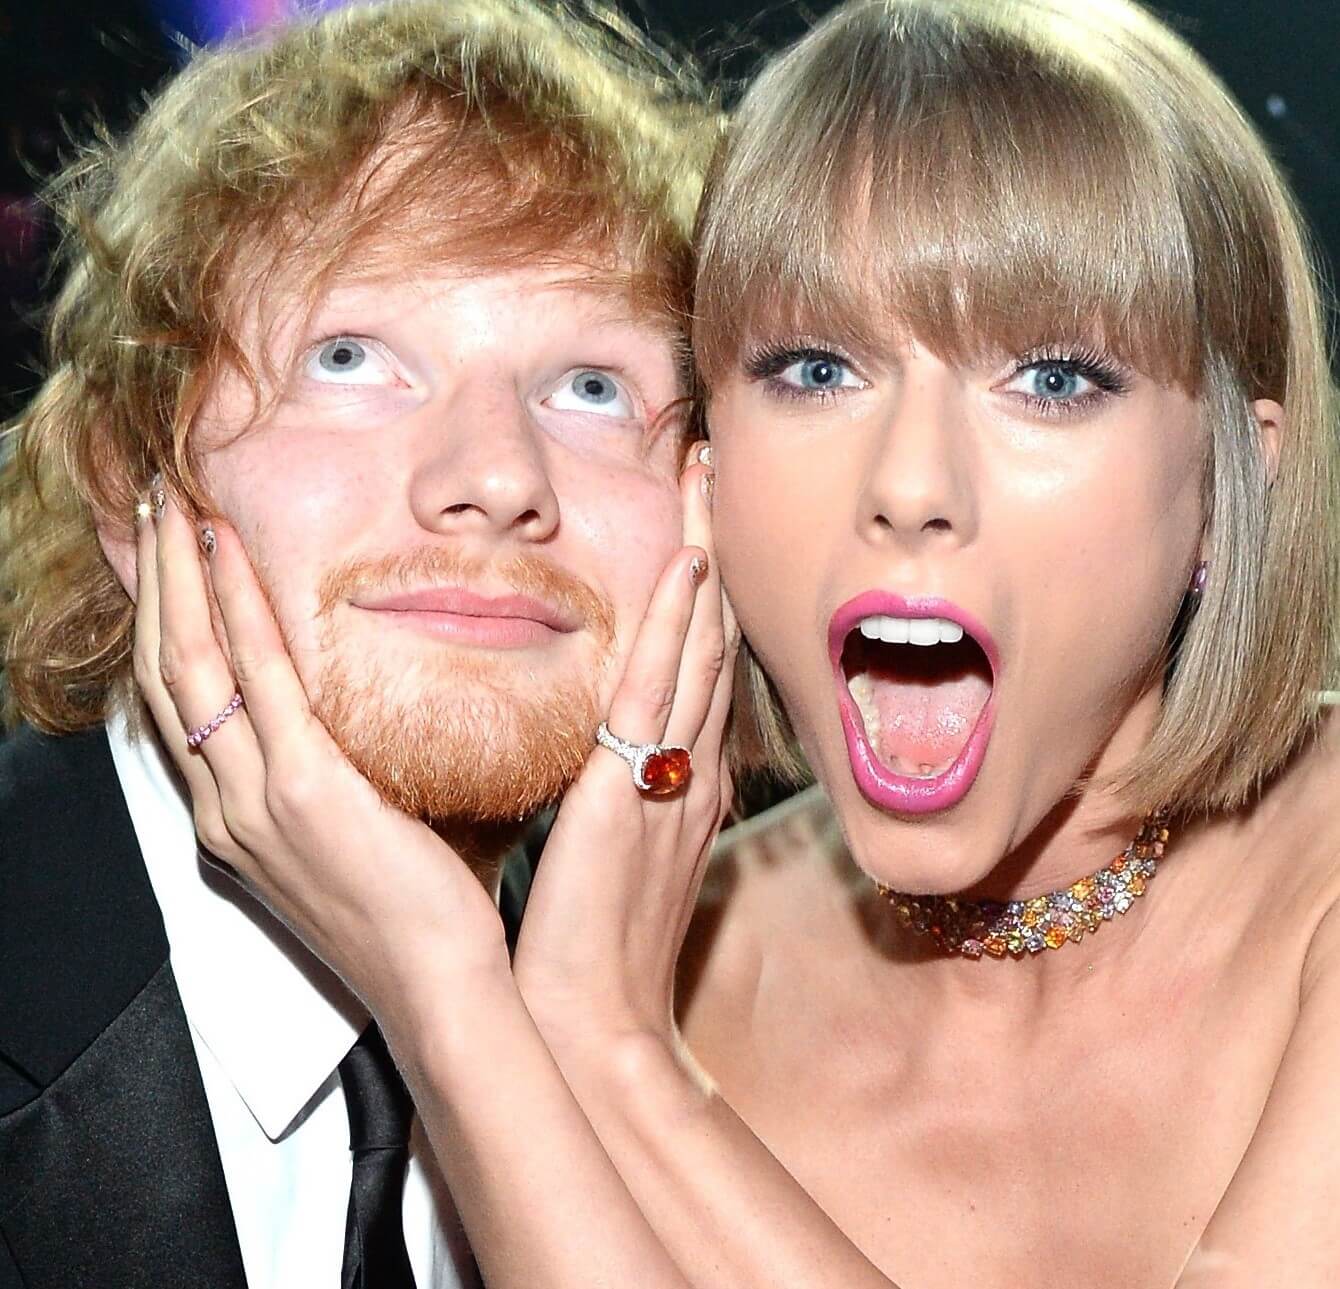 Taylor Swift putting her hands on Ed Sheeran's face